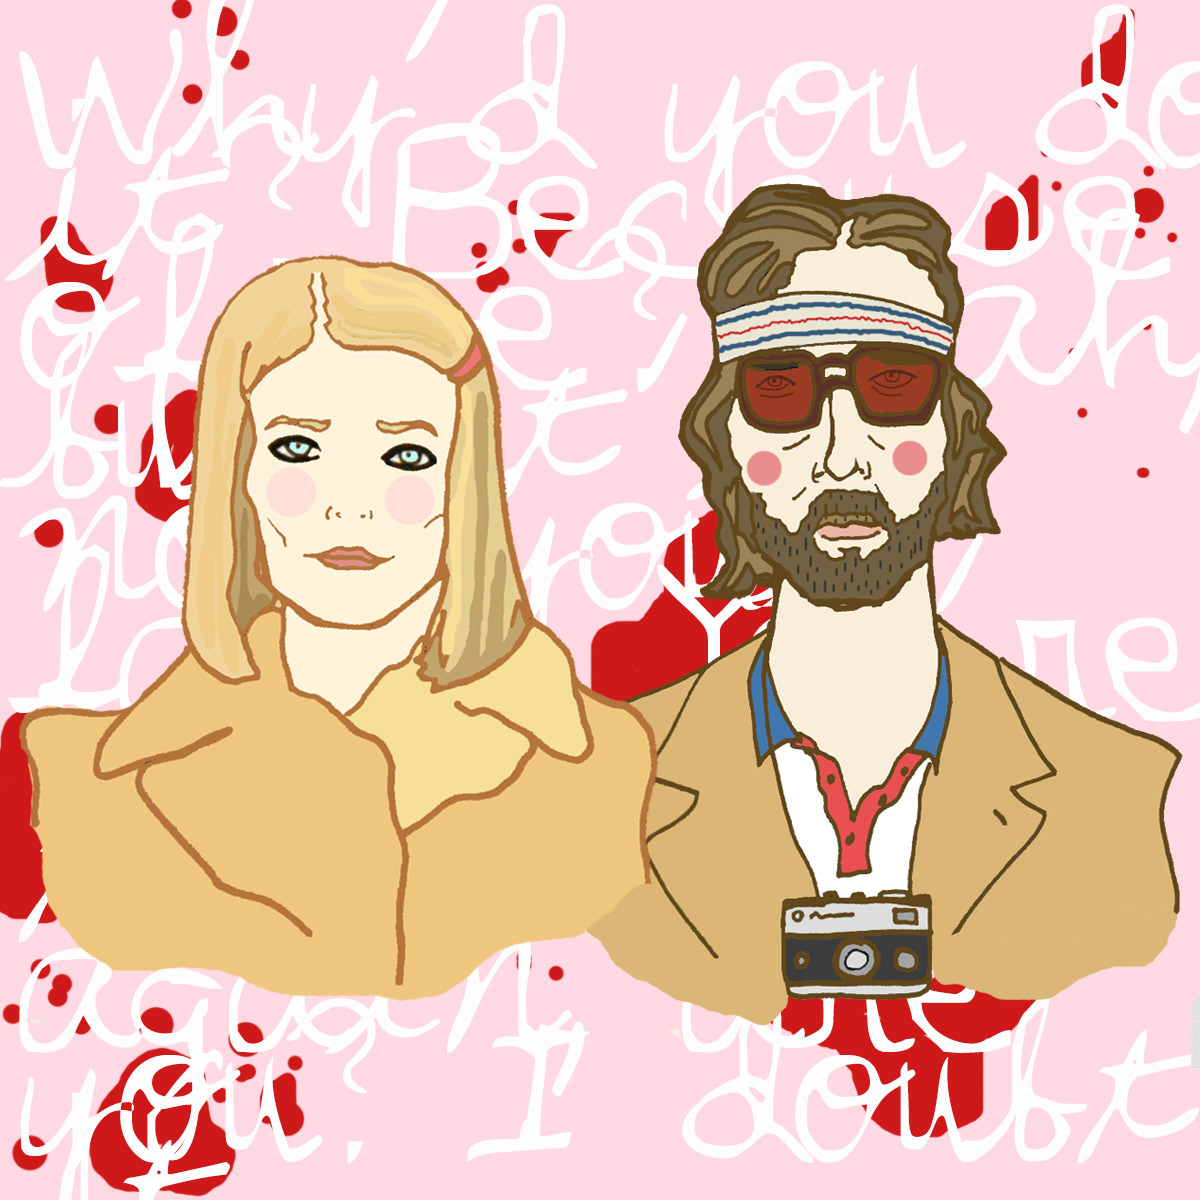 wes anderson suzy margot quirky portraits